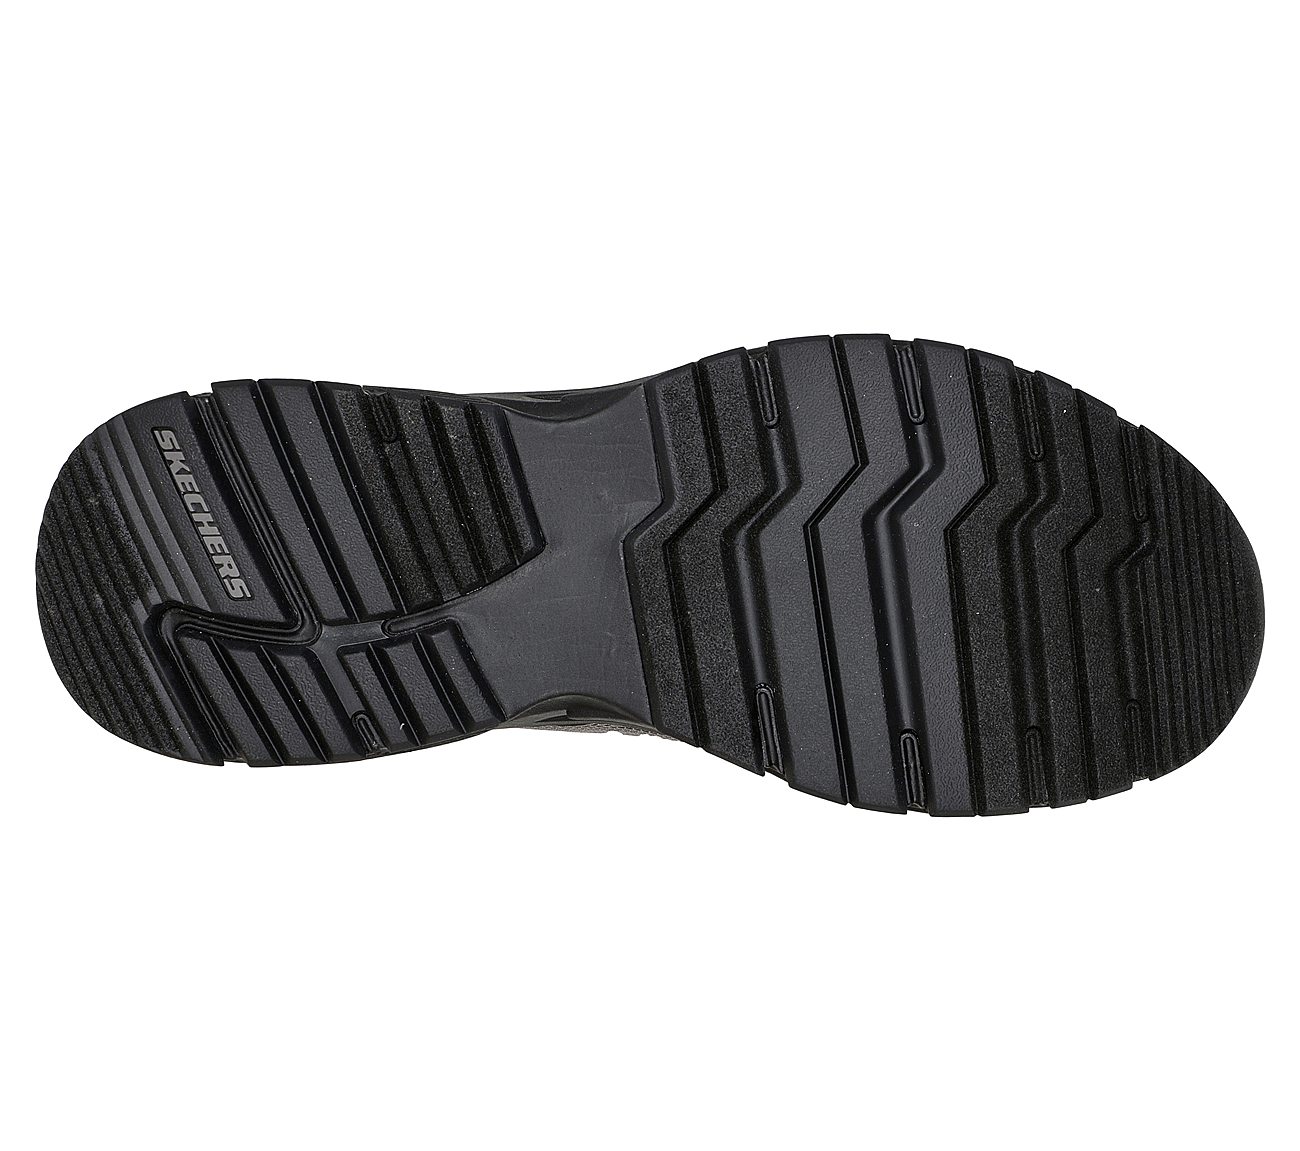 ARCH FIT BAXTER - PENDROY, GREY/BLACK Footwear Bottom View